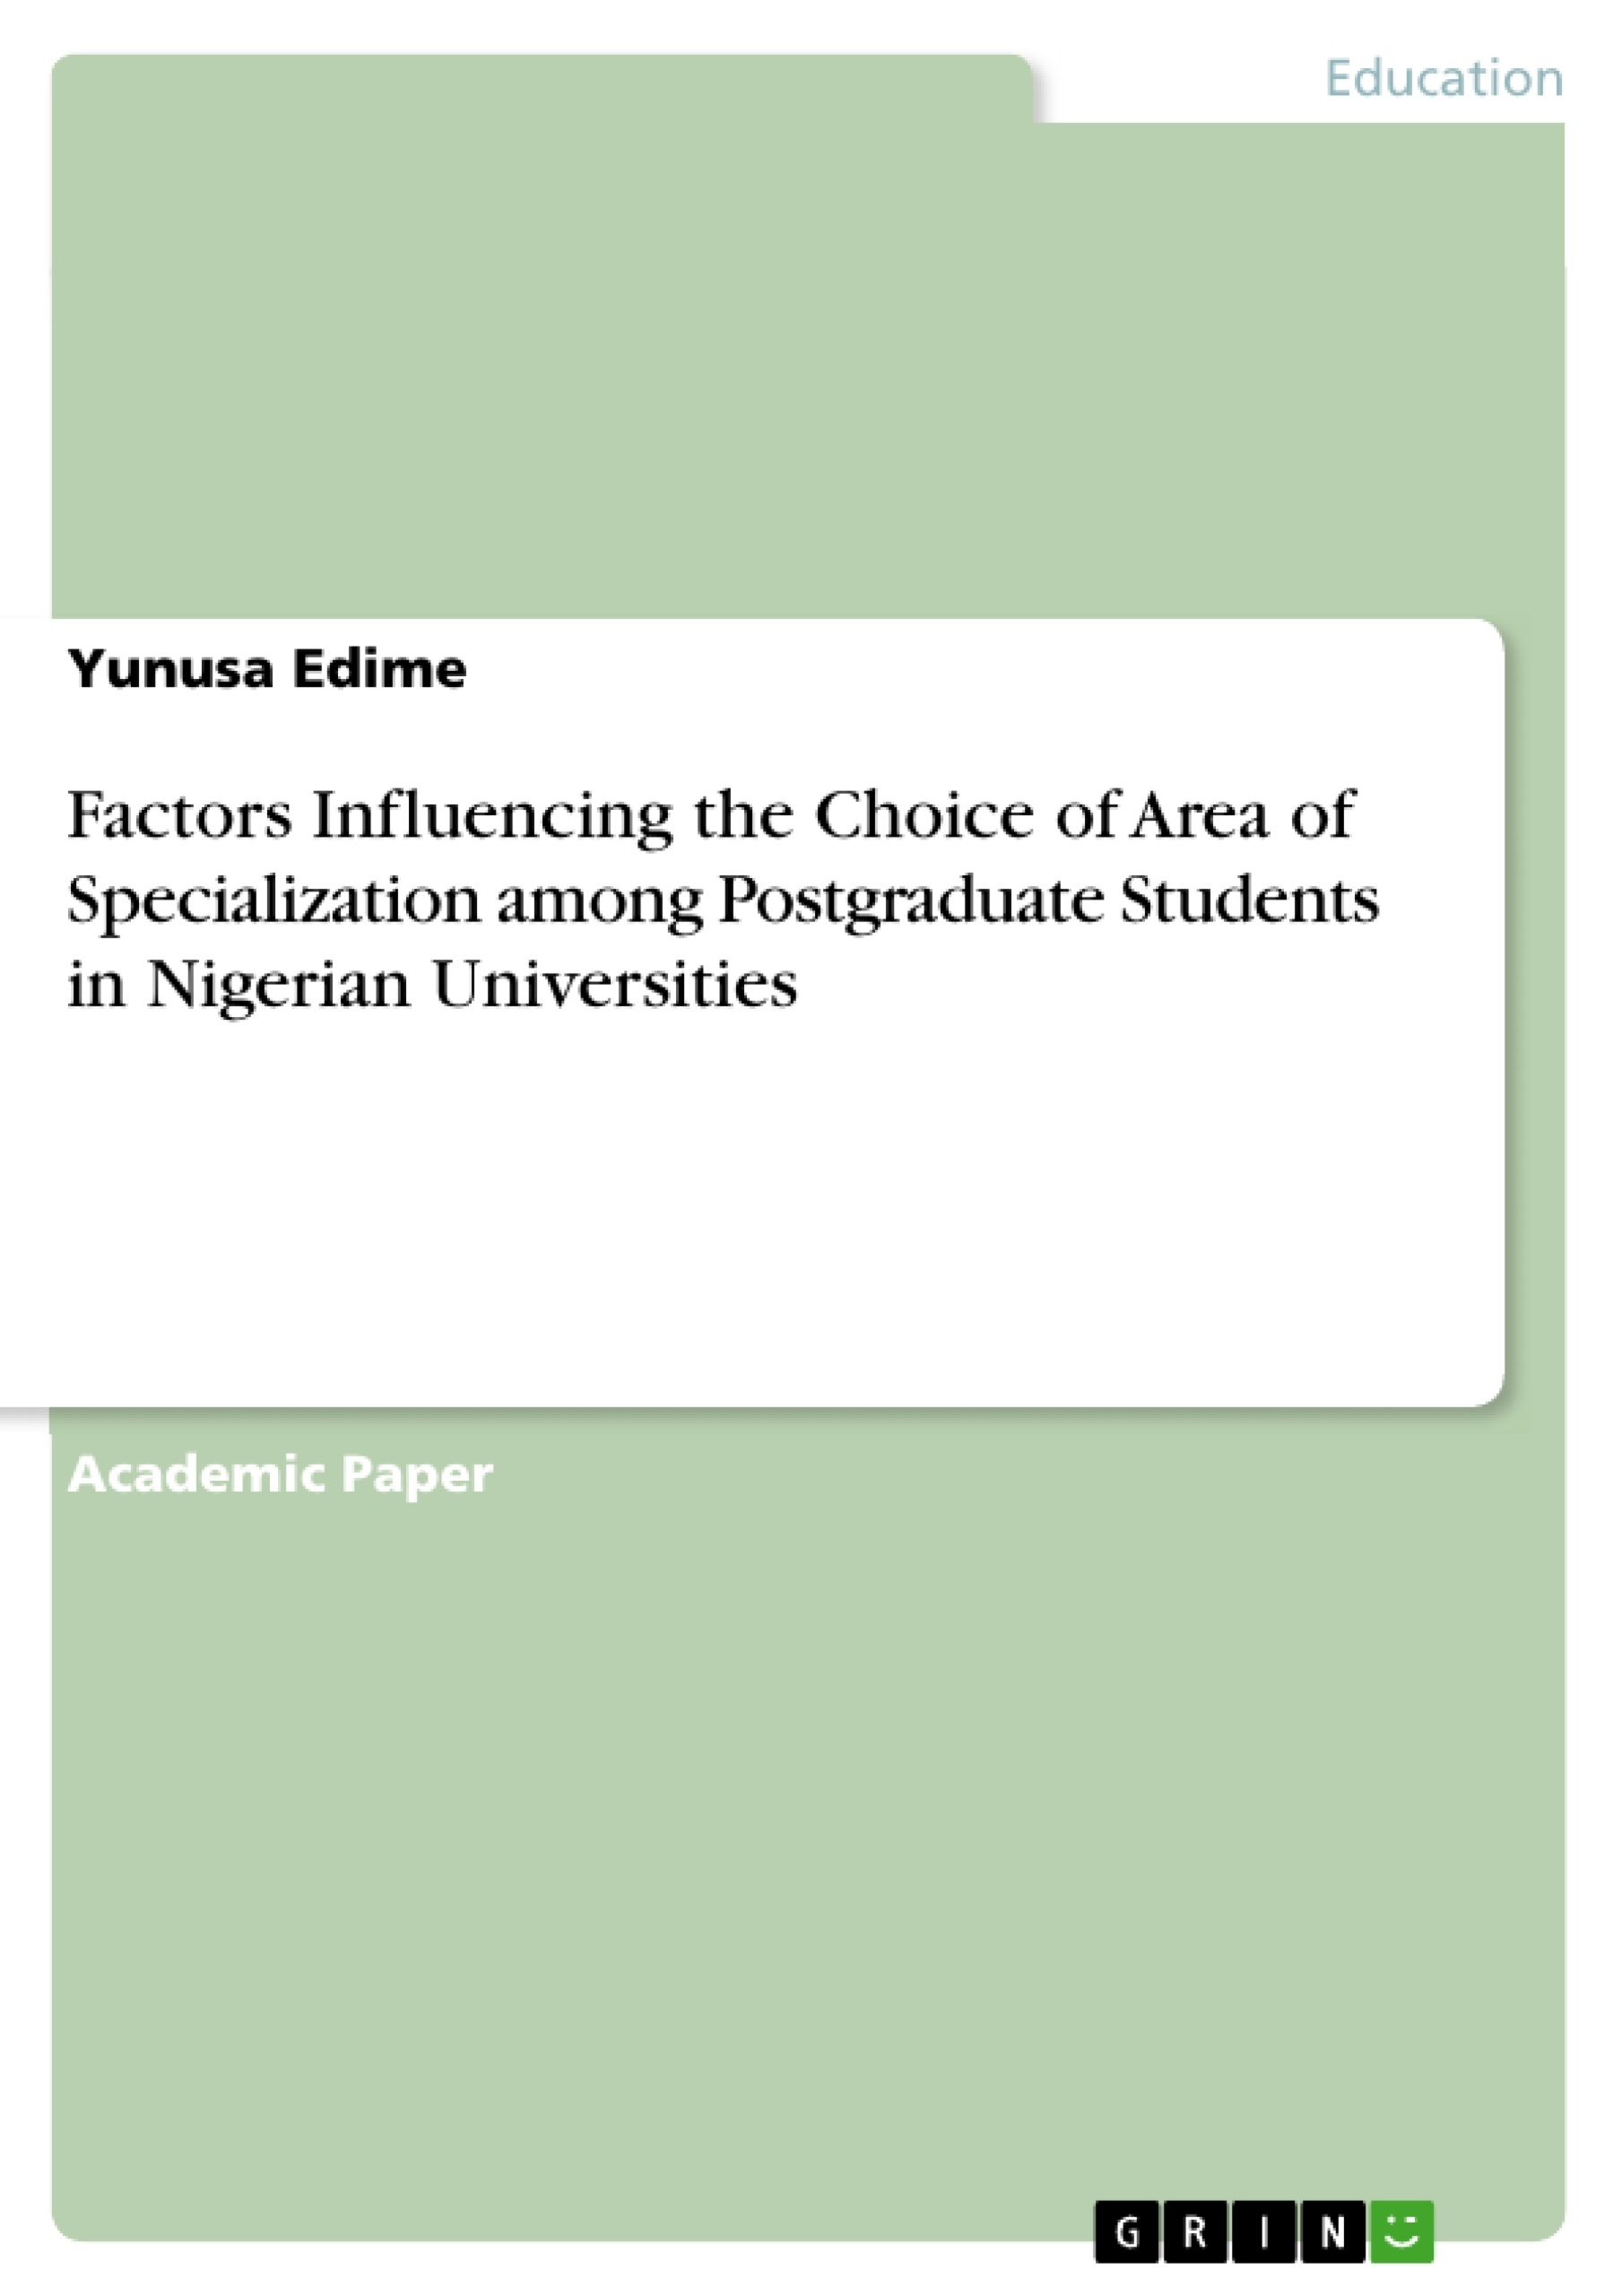 Title: Factors Influencing the Choice of Area of Specialization among Postgraduate Students in Nigerian Universities